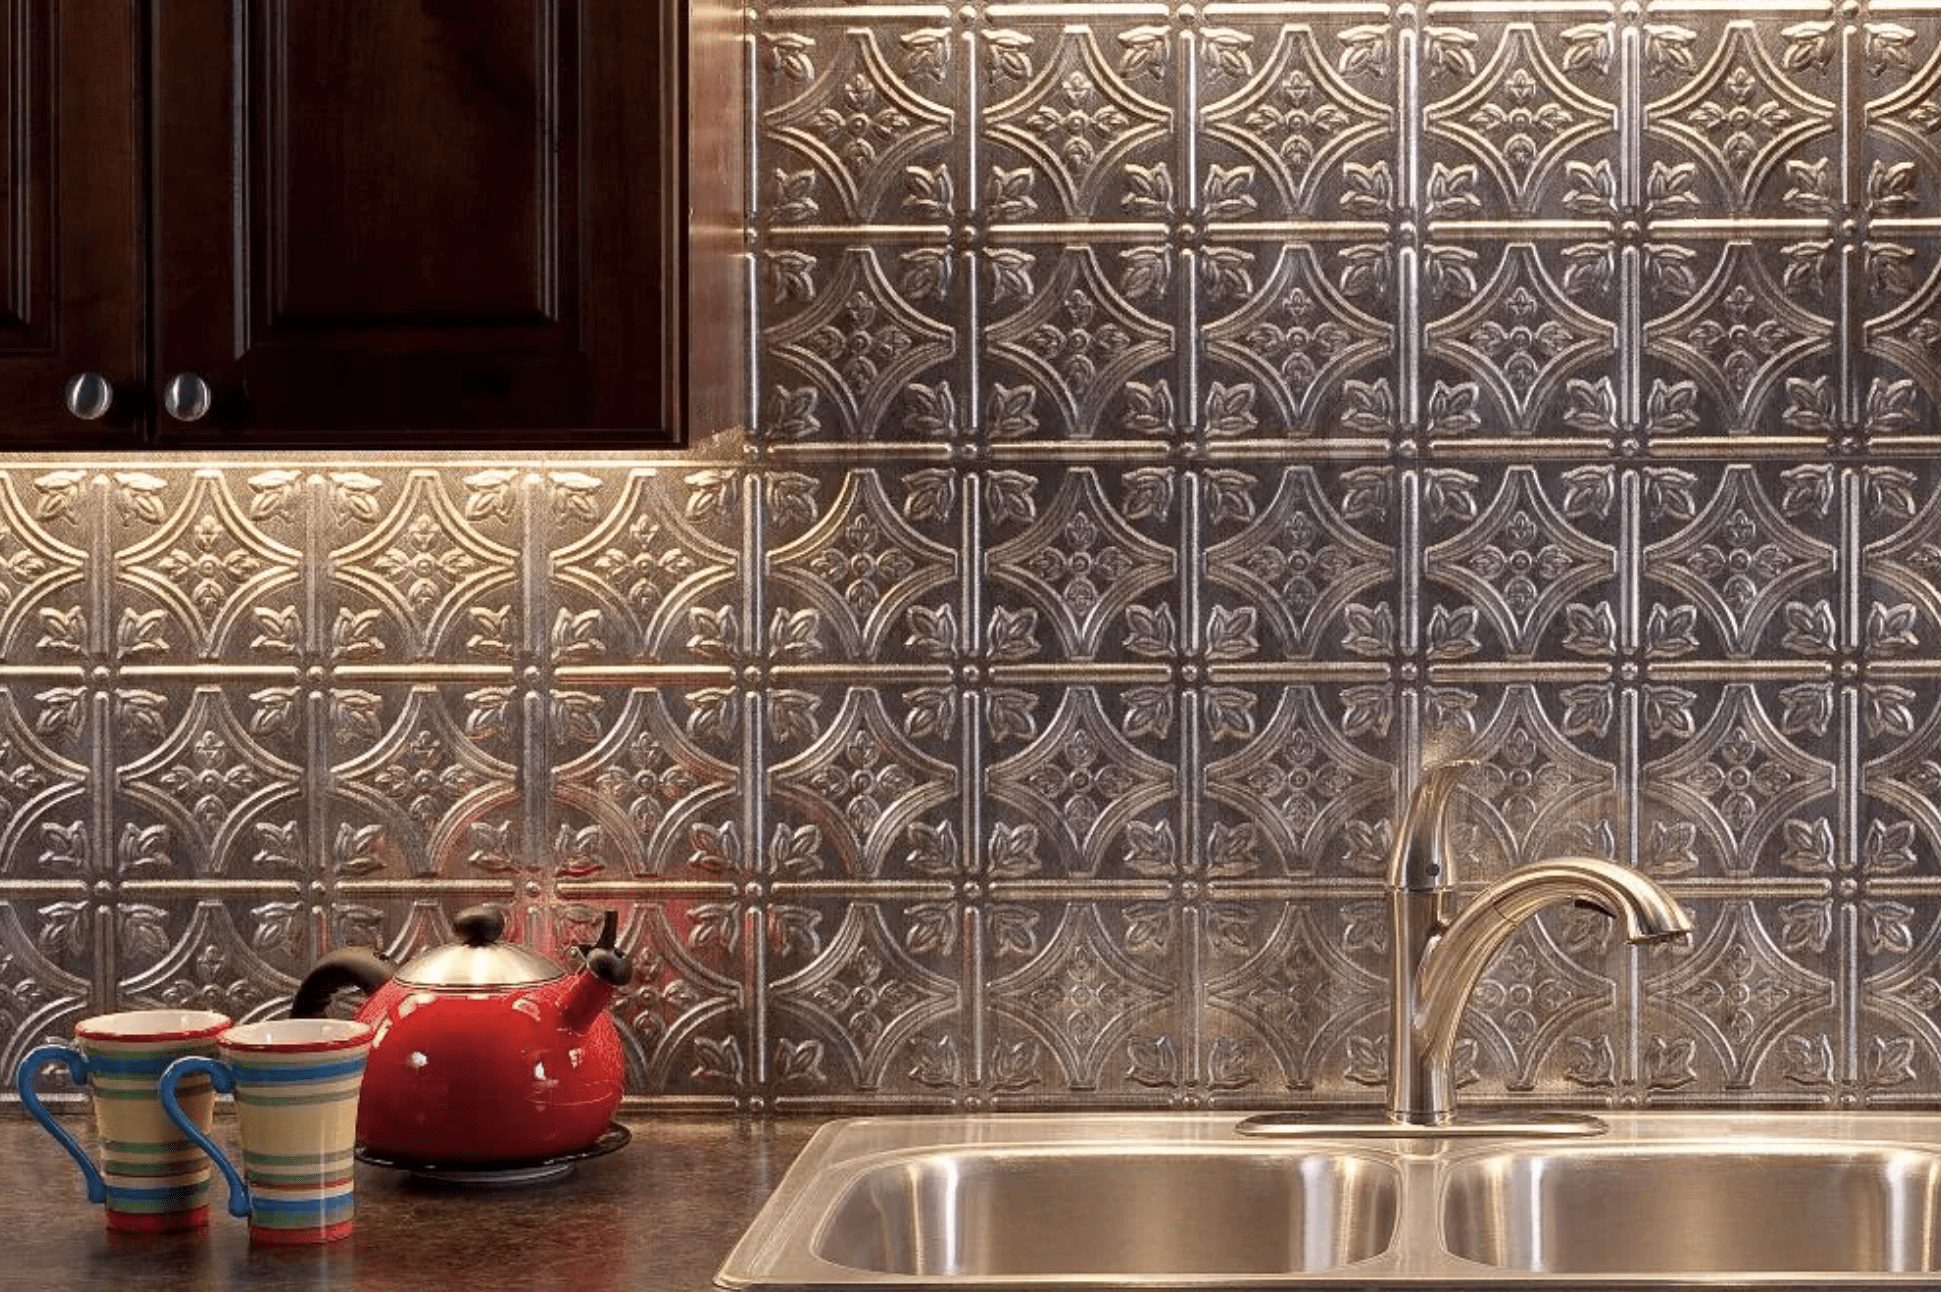 8 alternatives to tile backsplash to give your kitchen a unique look